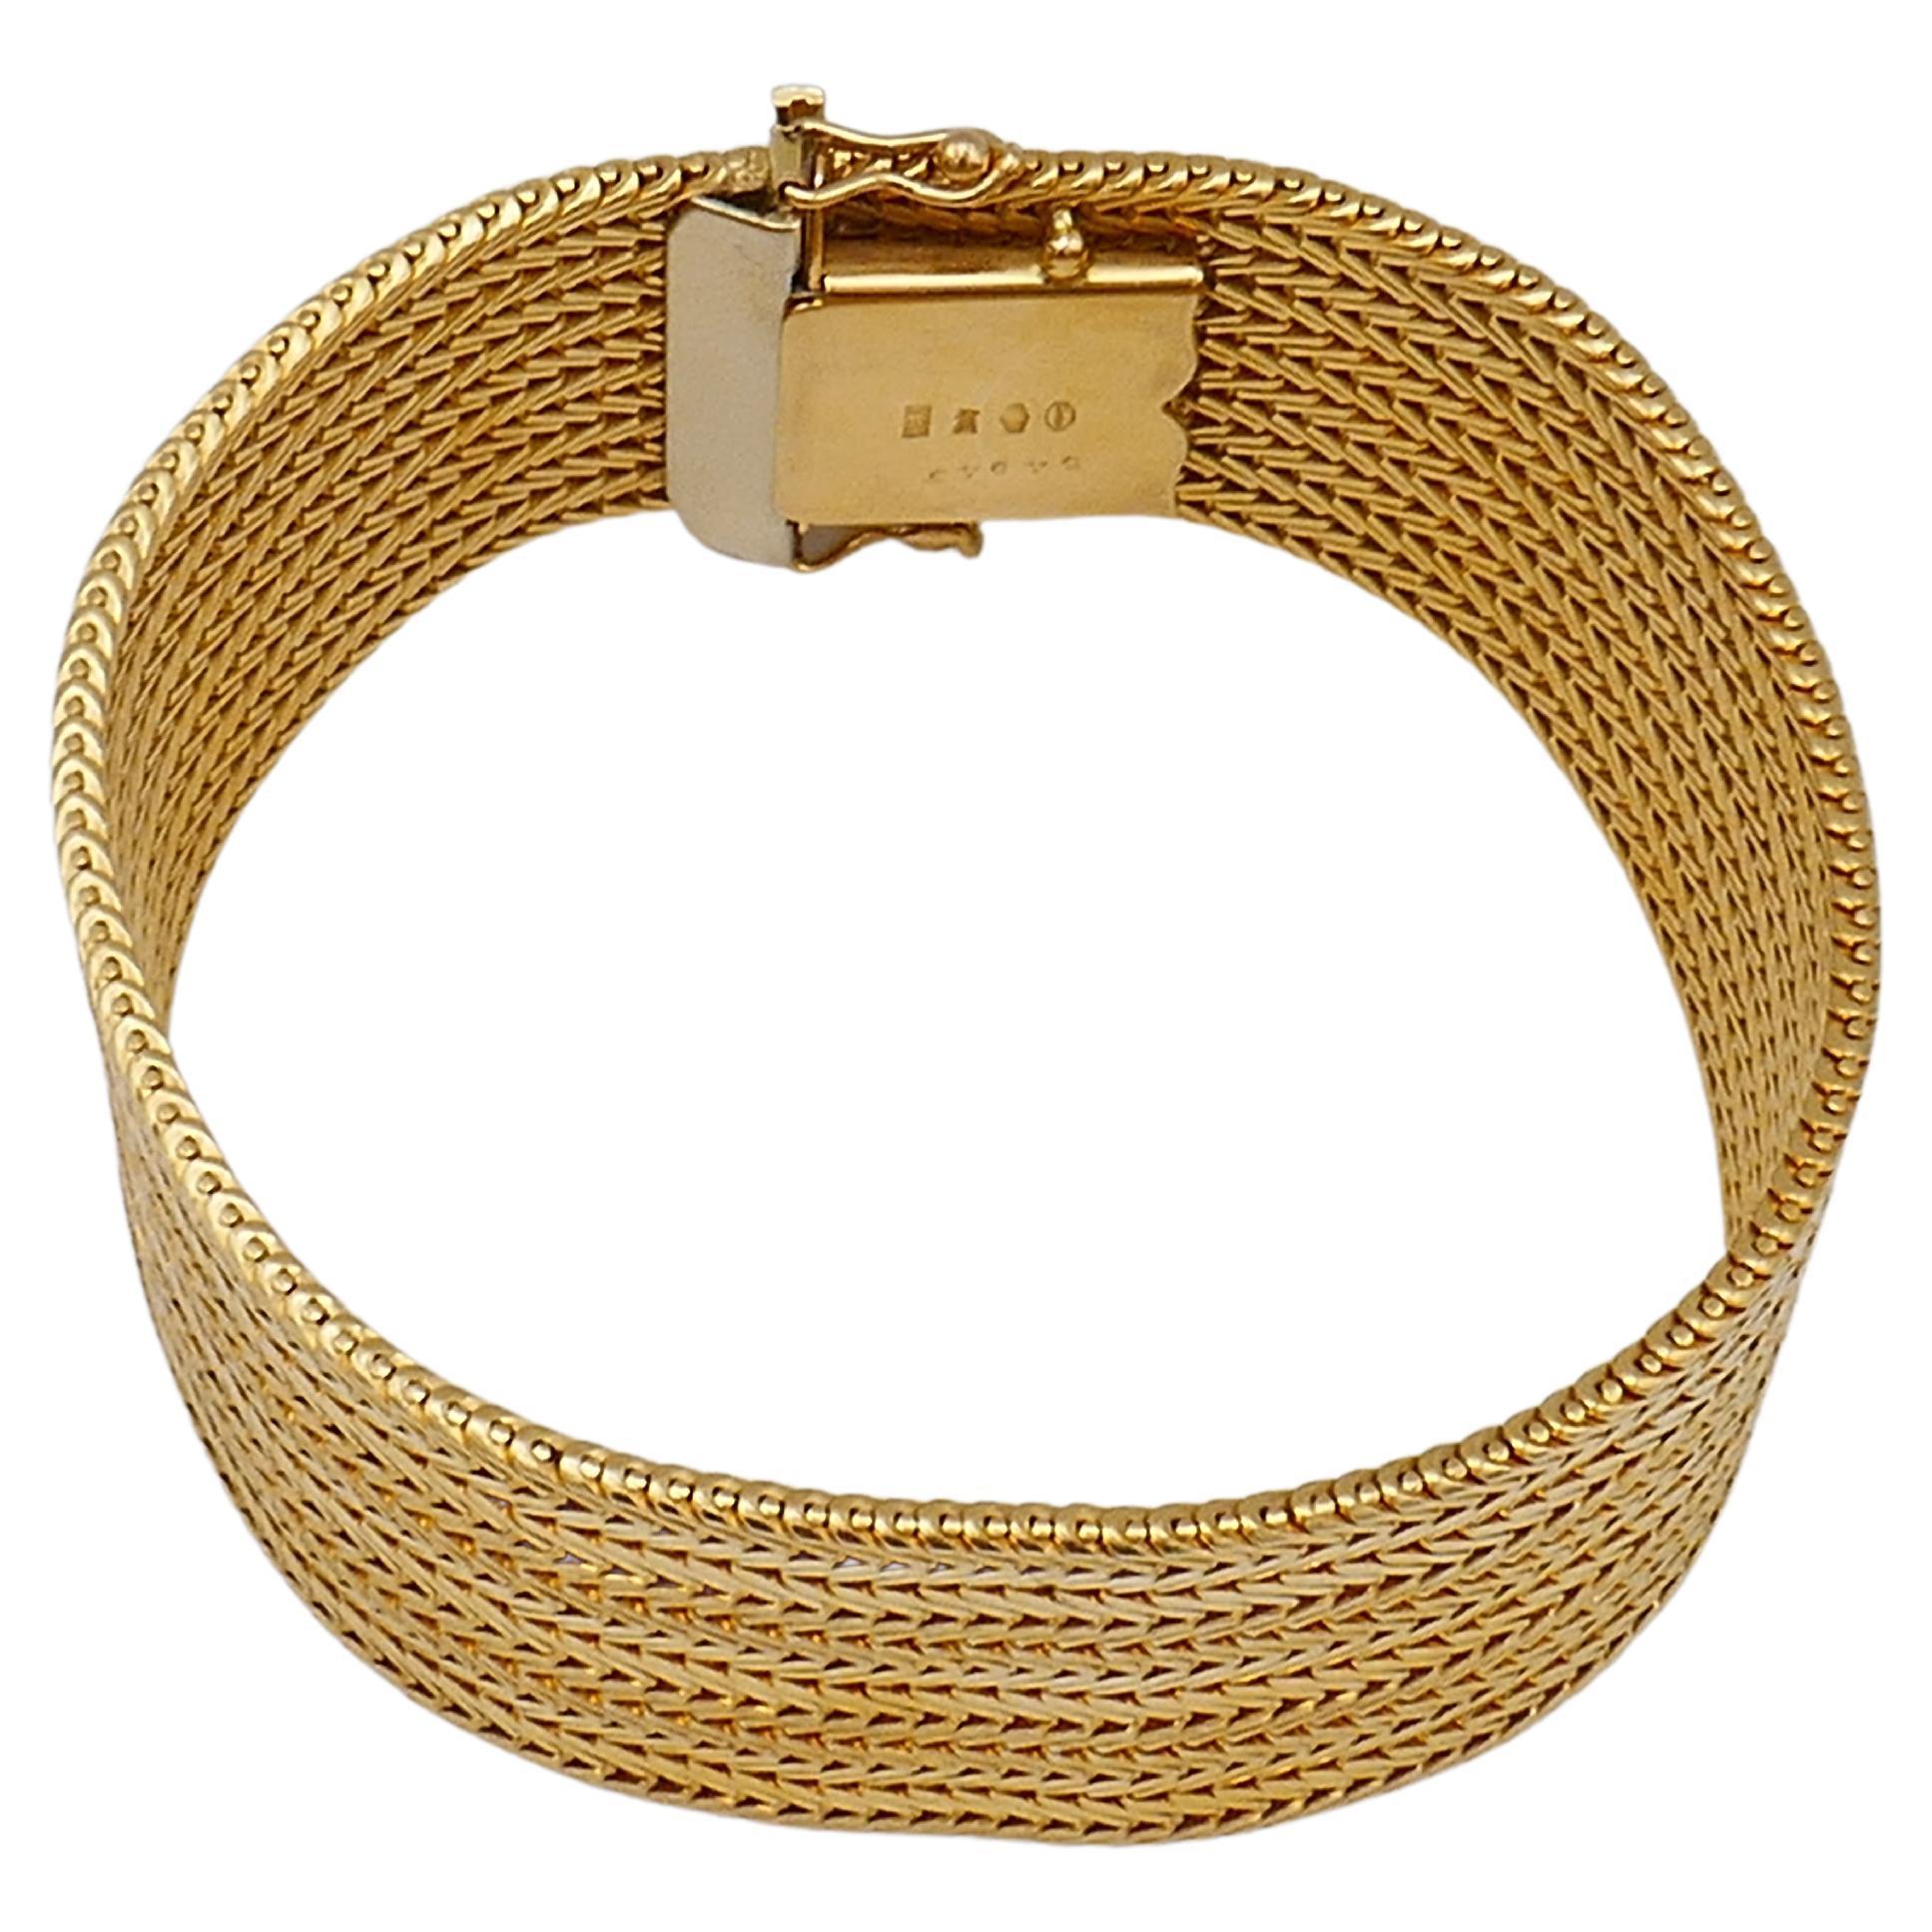 A neat vintage Cartier bracelet made of 18k yellow gold with a braided glossy texture. Stamped with Cartier maker's mark, a hallmark for 18k gold, a country of origin (Italy) and a serial number.
Measurements: 7.5